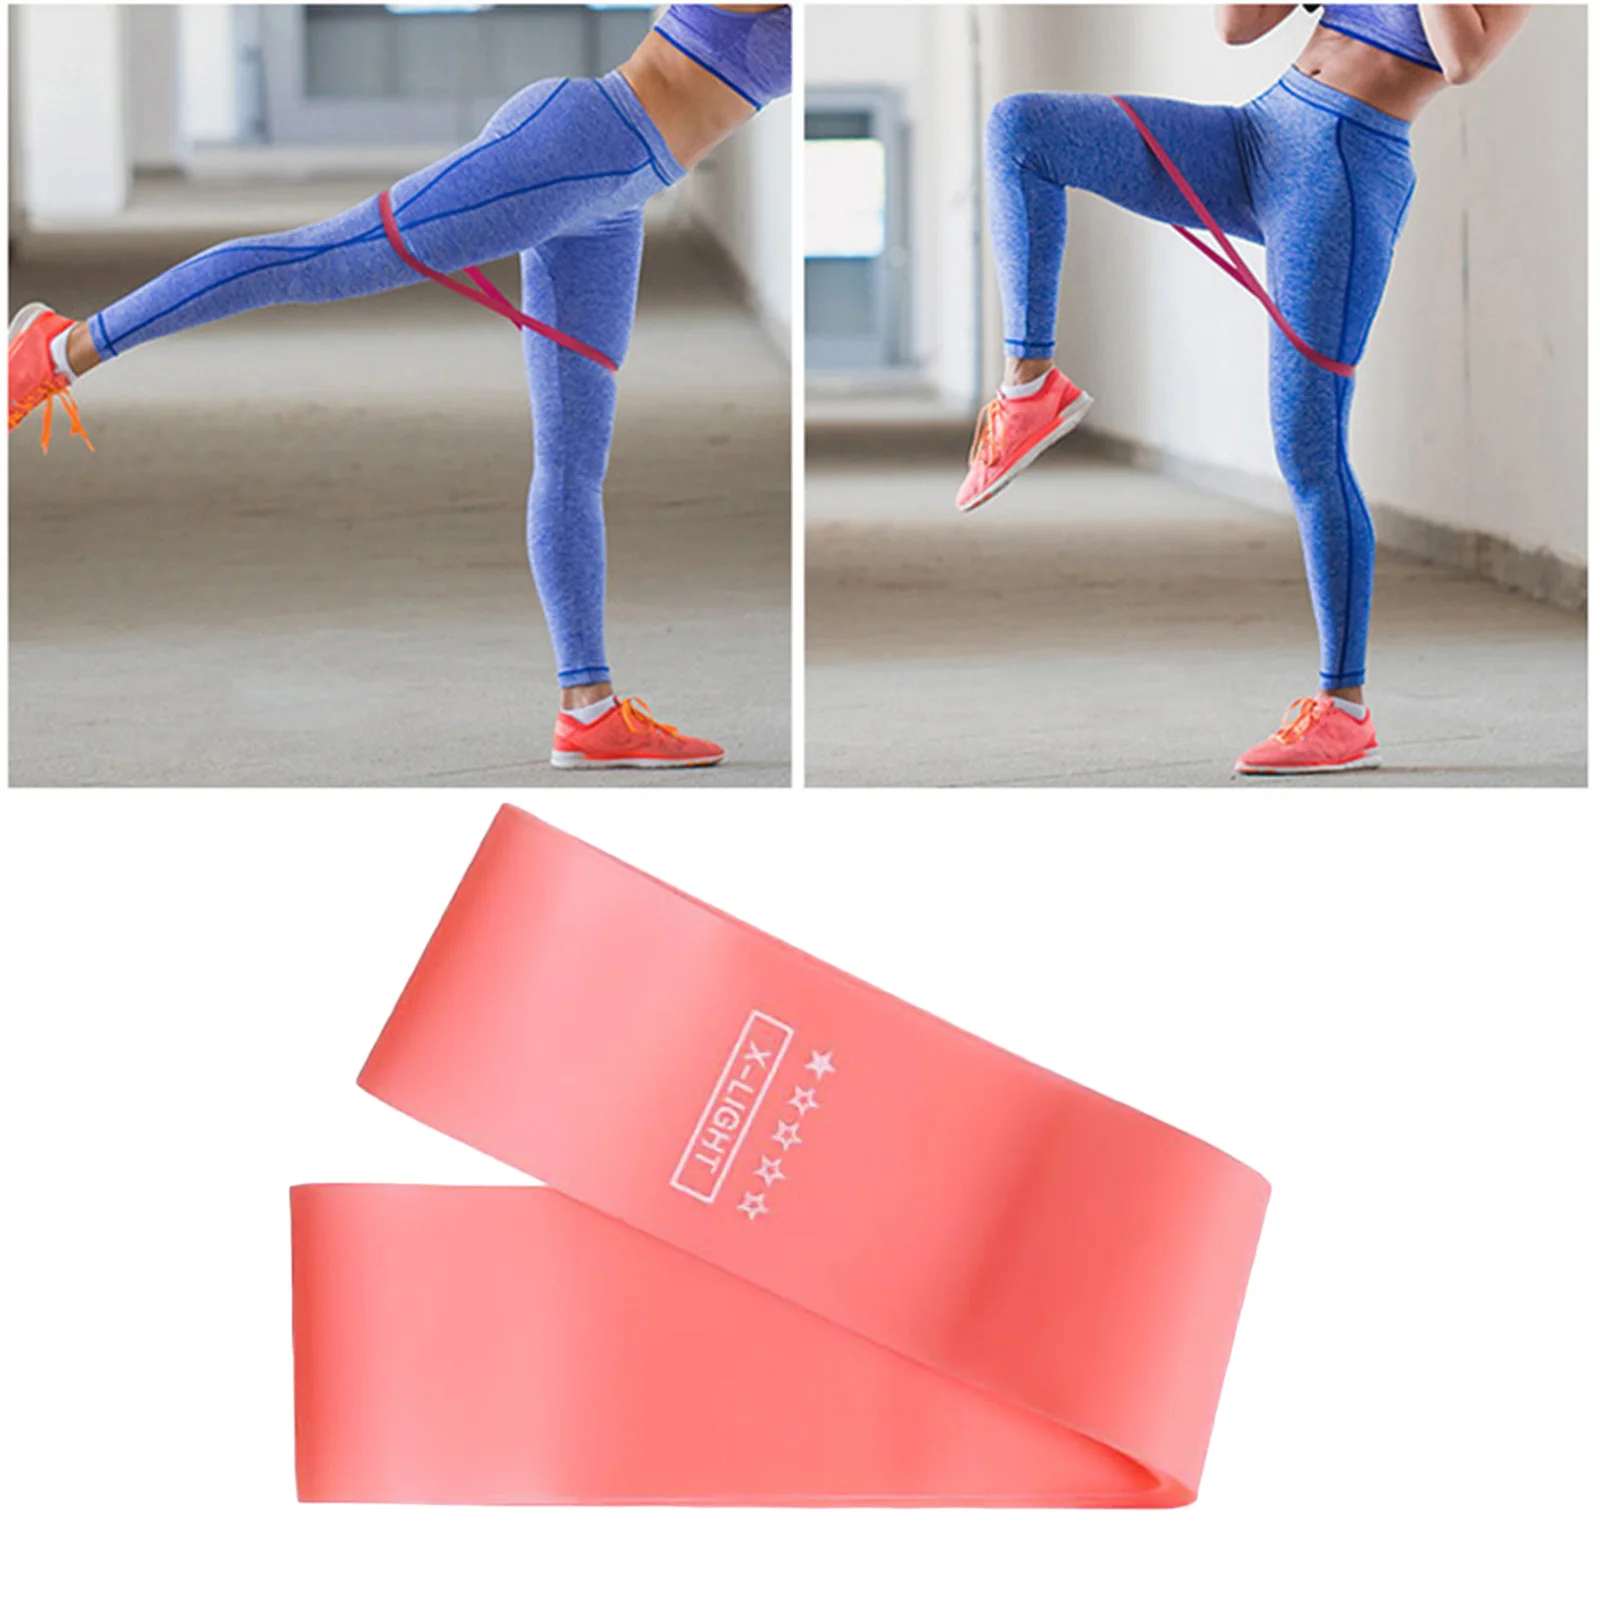 Sports Training Gym Non Slip Resistance Band 5 level for Legs and Butt 5-40lb